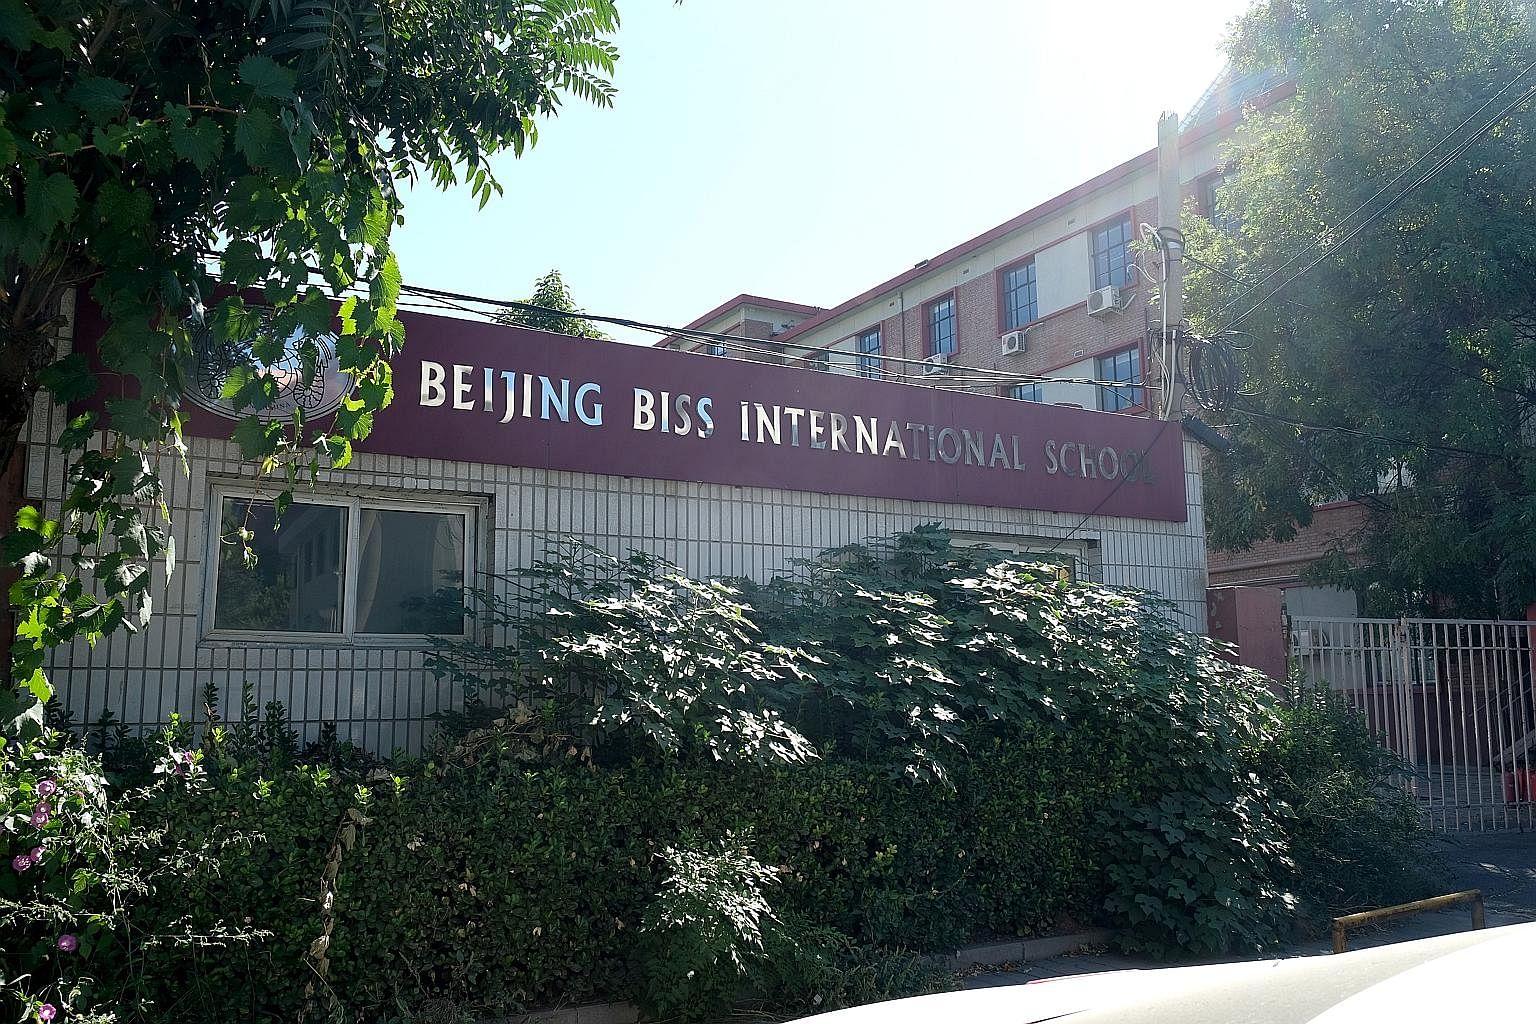 The gates of Beijing BISS International School were padlocked yesterday. The school is listed as part of the ISS education group, which also runs the ISS International School in Singapore.